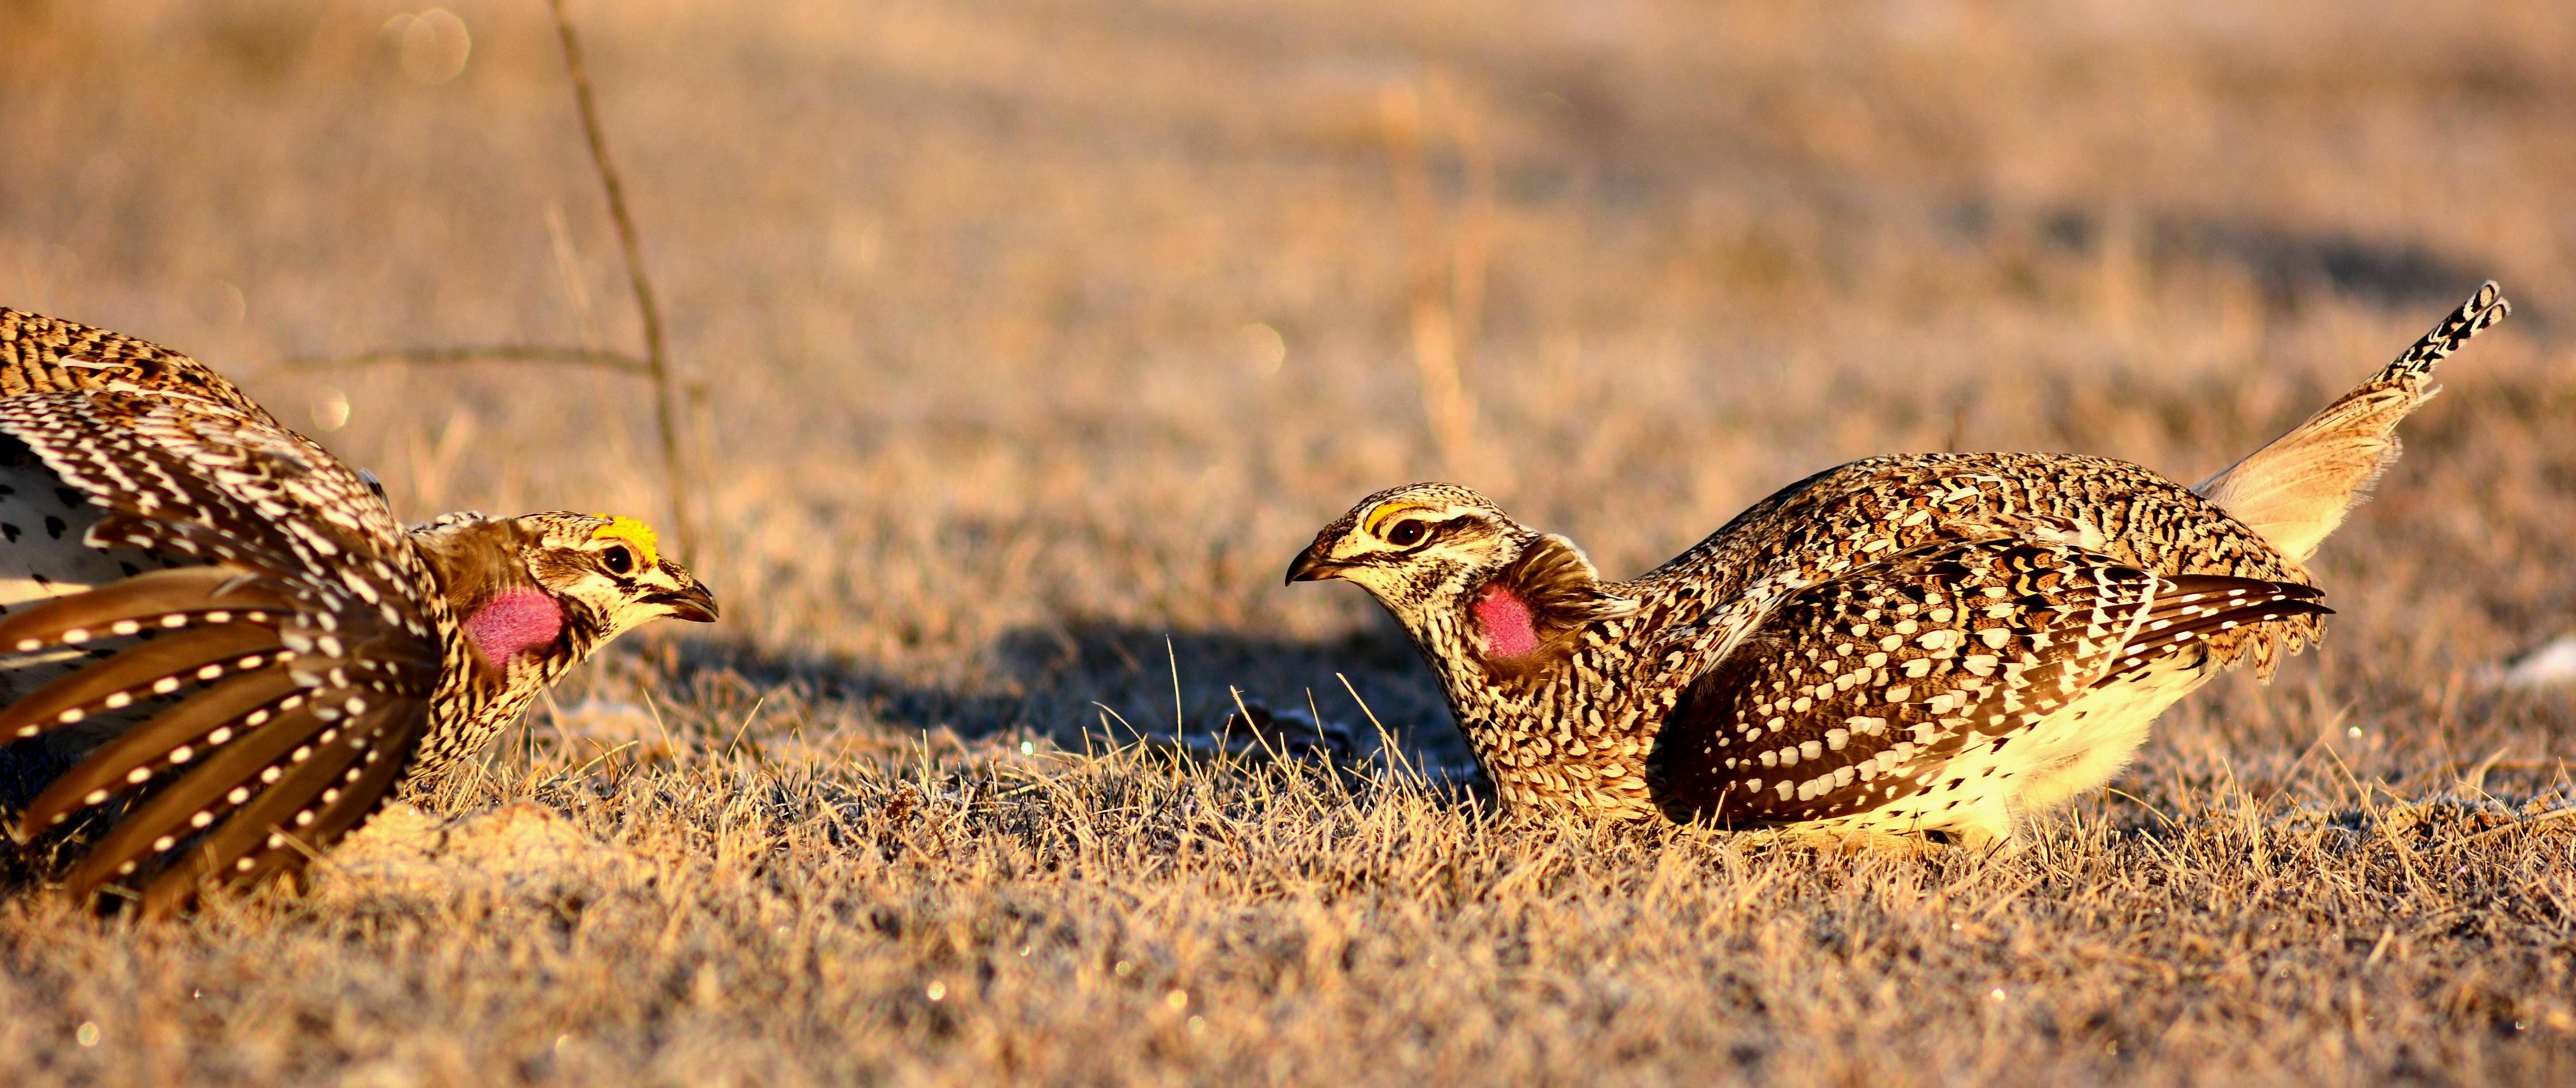 Sharp-Tailed Grouse photo Taken five miles SE of Woodworth, ND in the heart of America's Prairie Pothole Region.